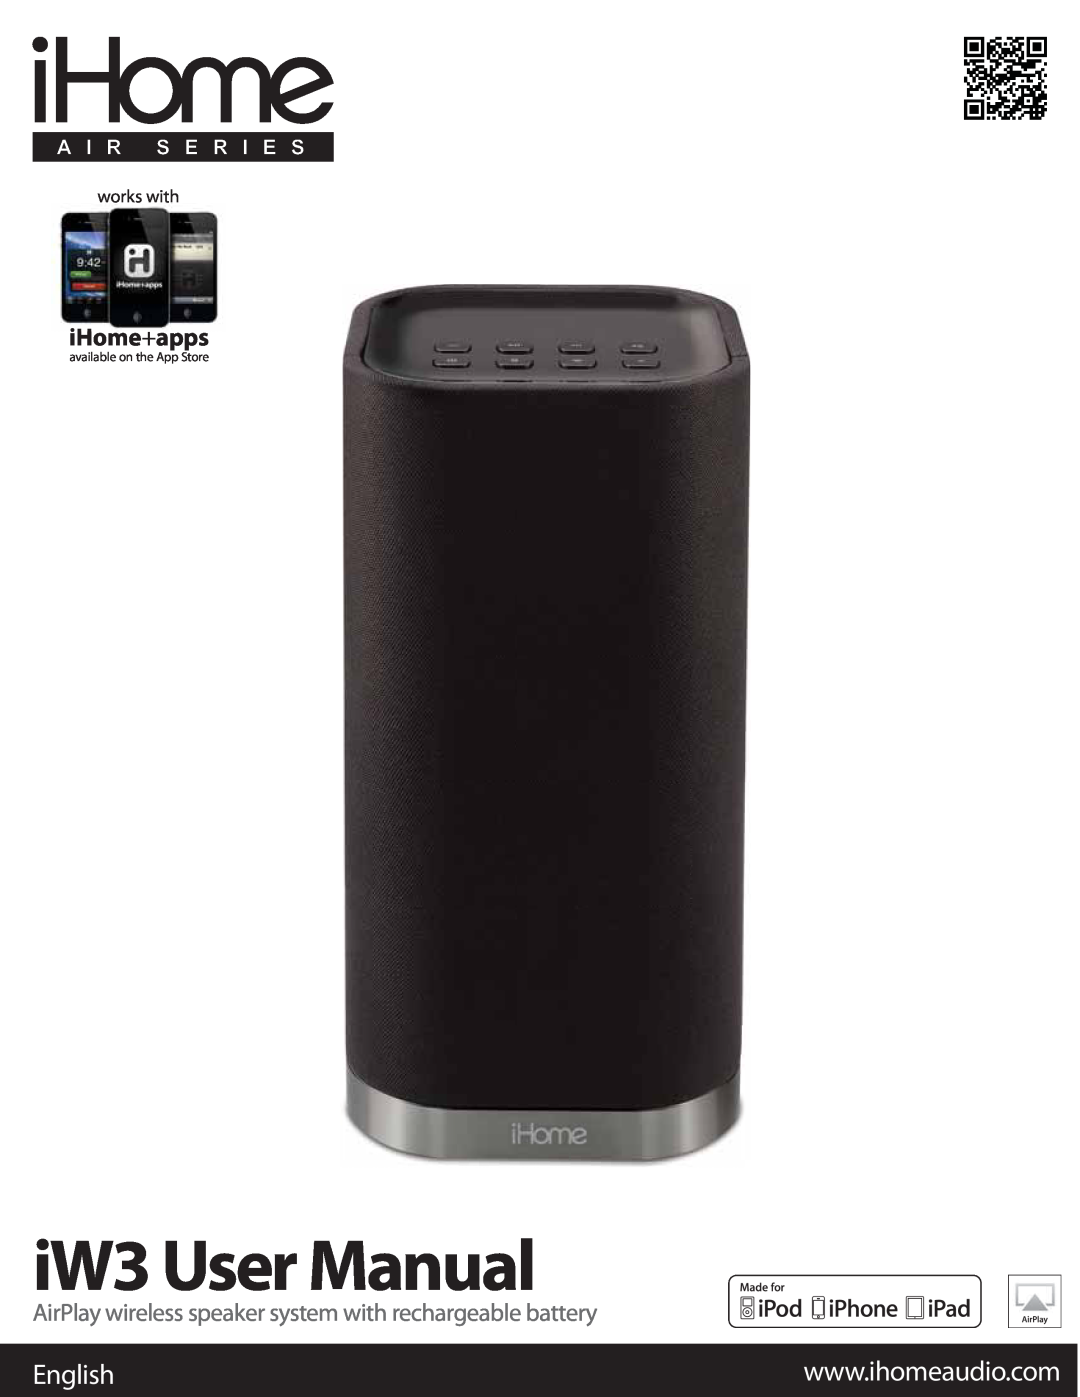 iHome user manual English, iW3 User Manual, iHome+apps, AirPlay wireless speaker system with rechargeable battery 